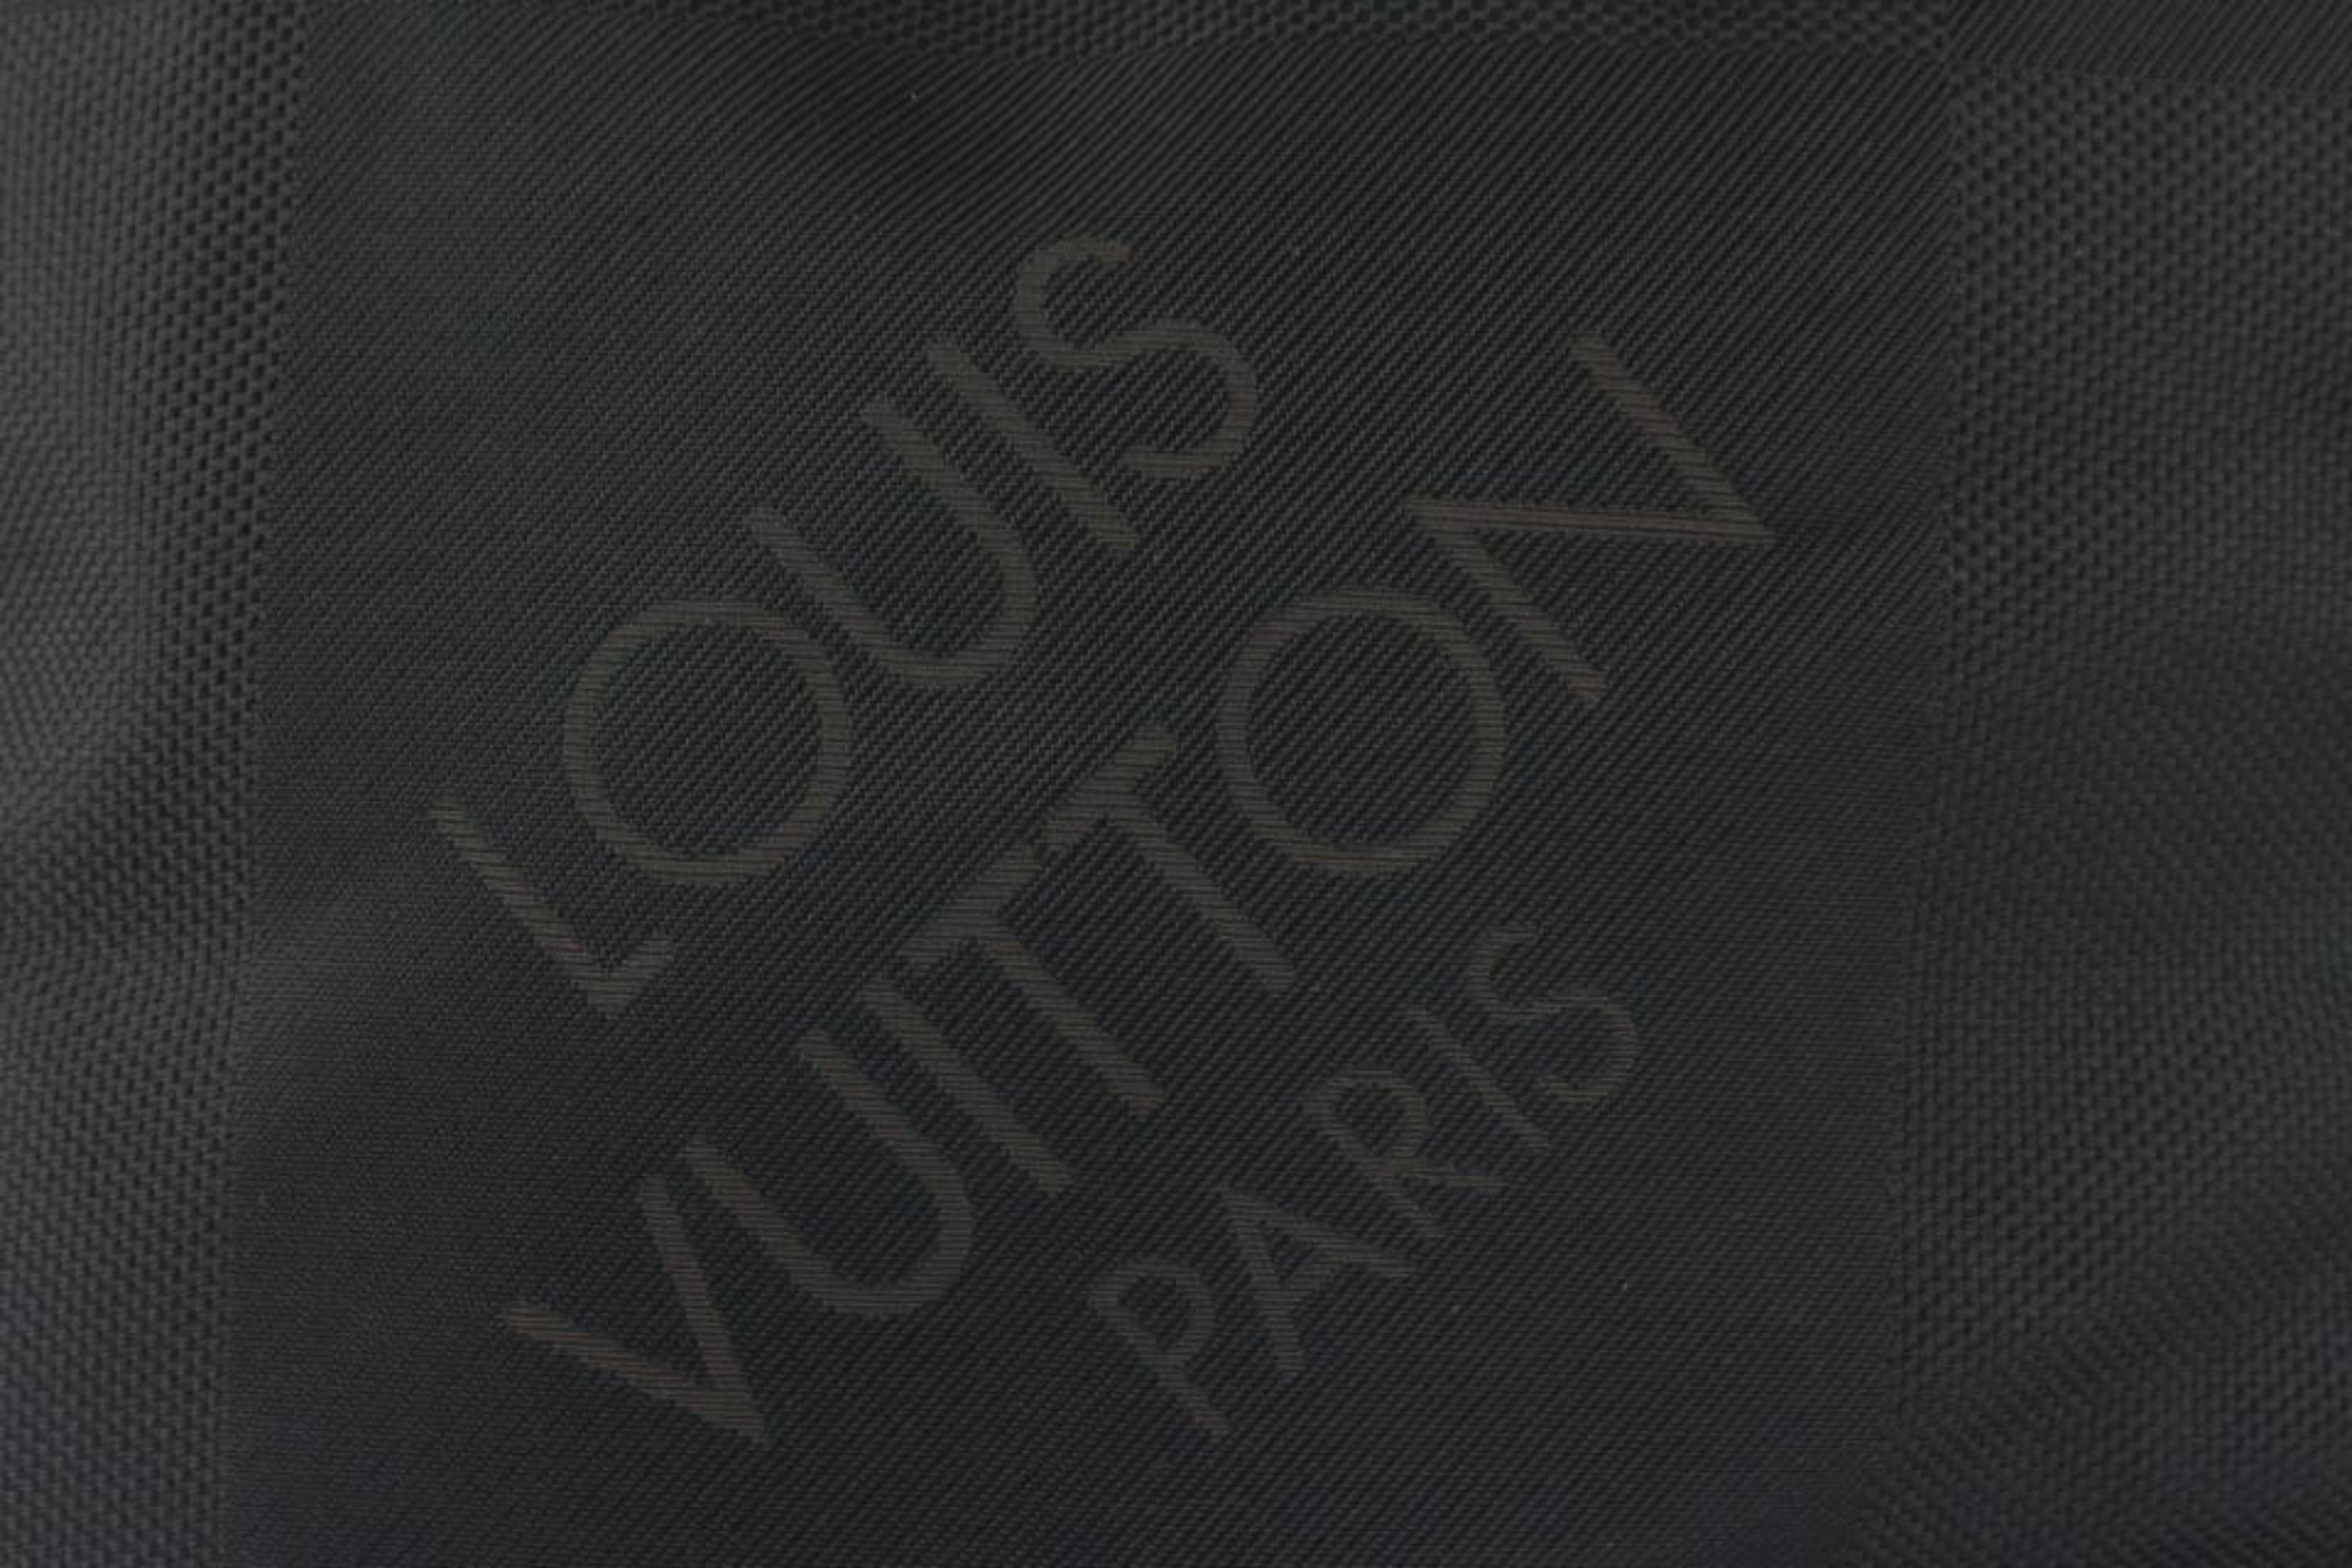 Louis Vuitton Black Damier Geant Aventurier Polaire Travel Bag 122lv14 In Good Condition For Sale In Dix hills, NY